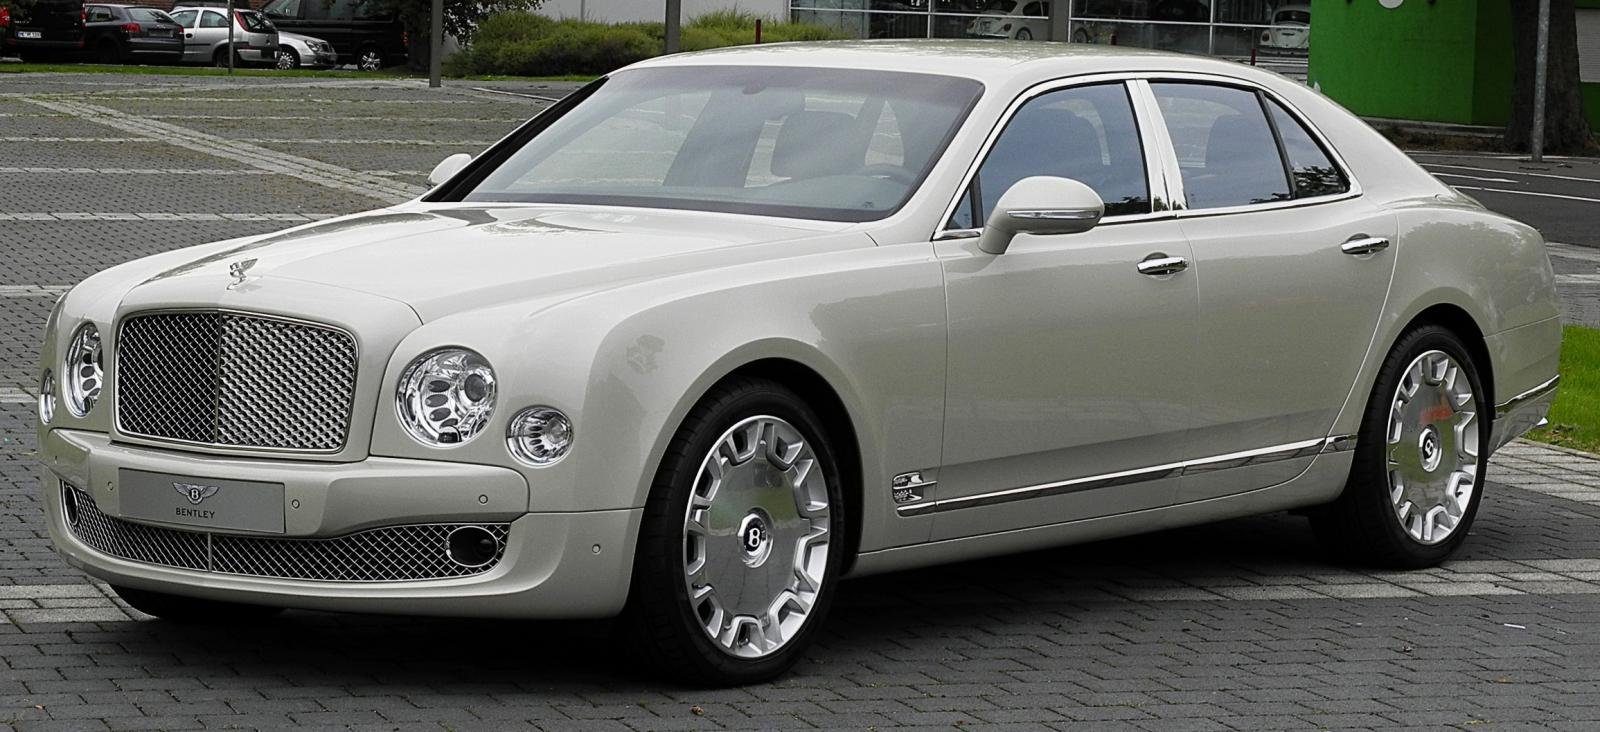 Top 15 Most Expensive Cars in India